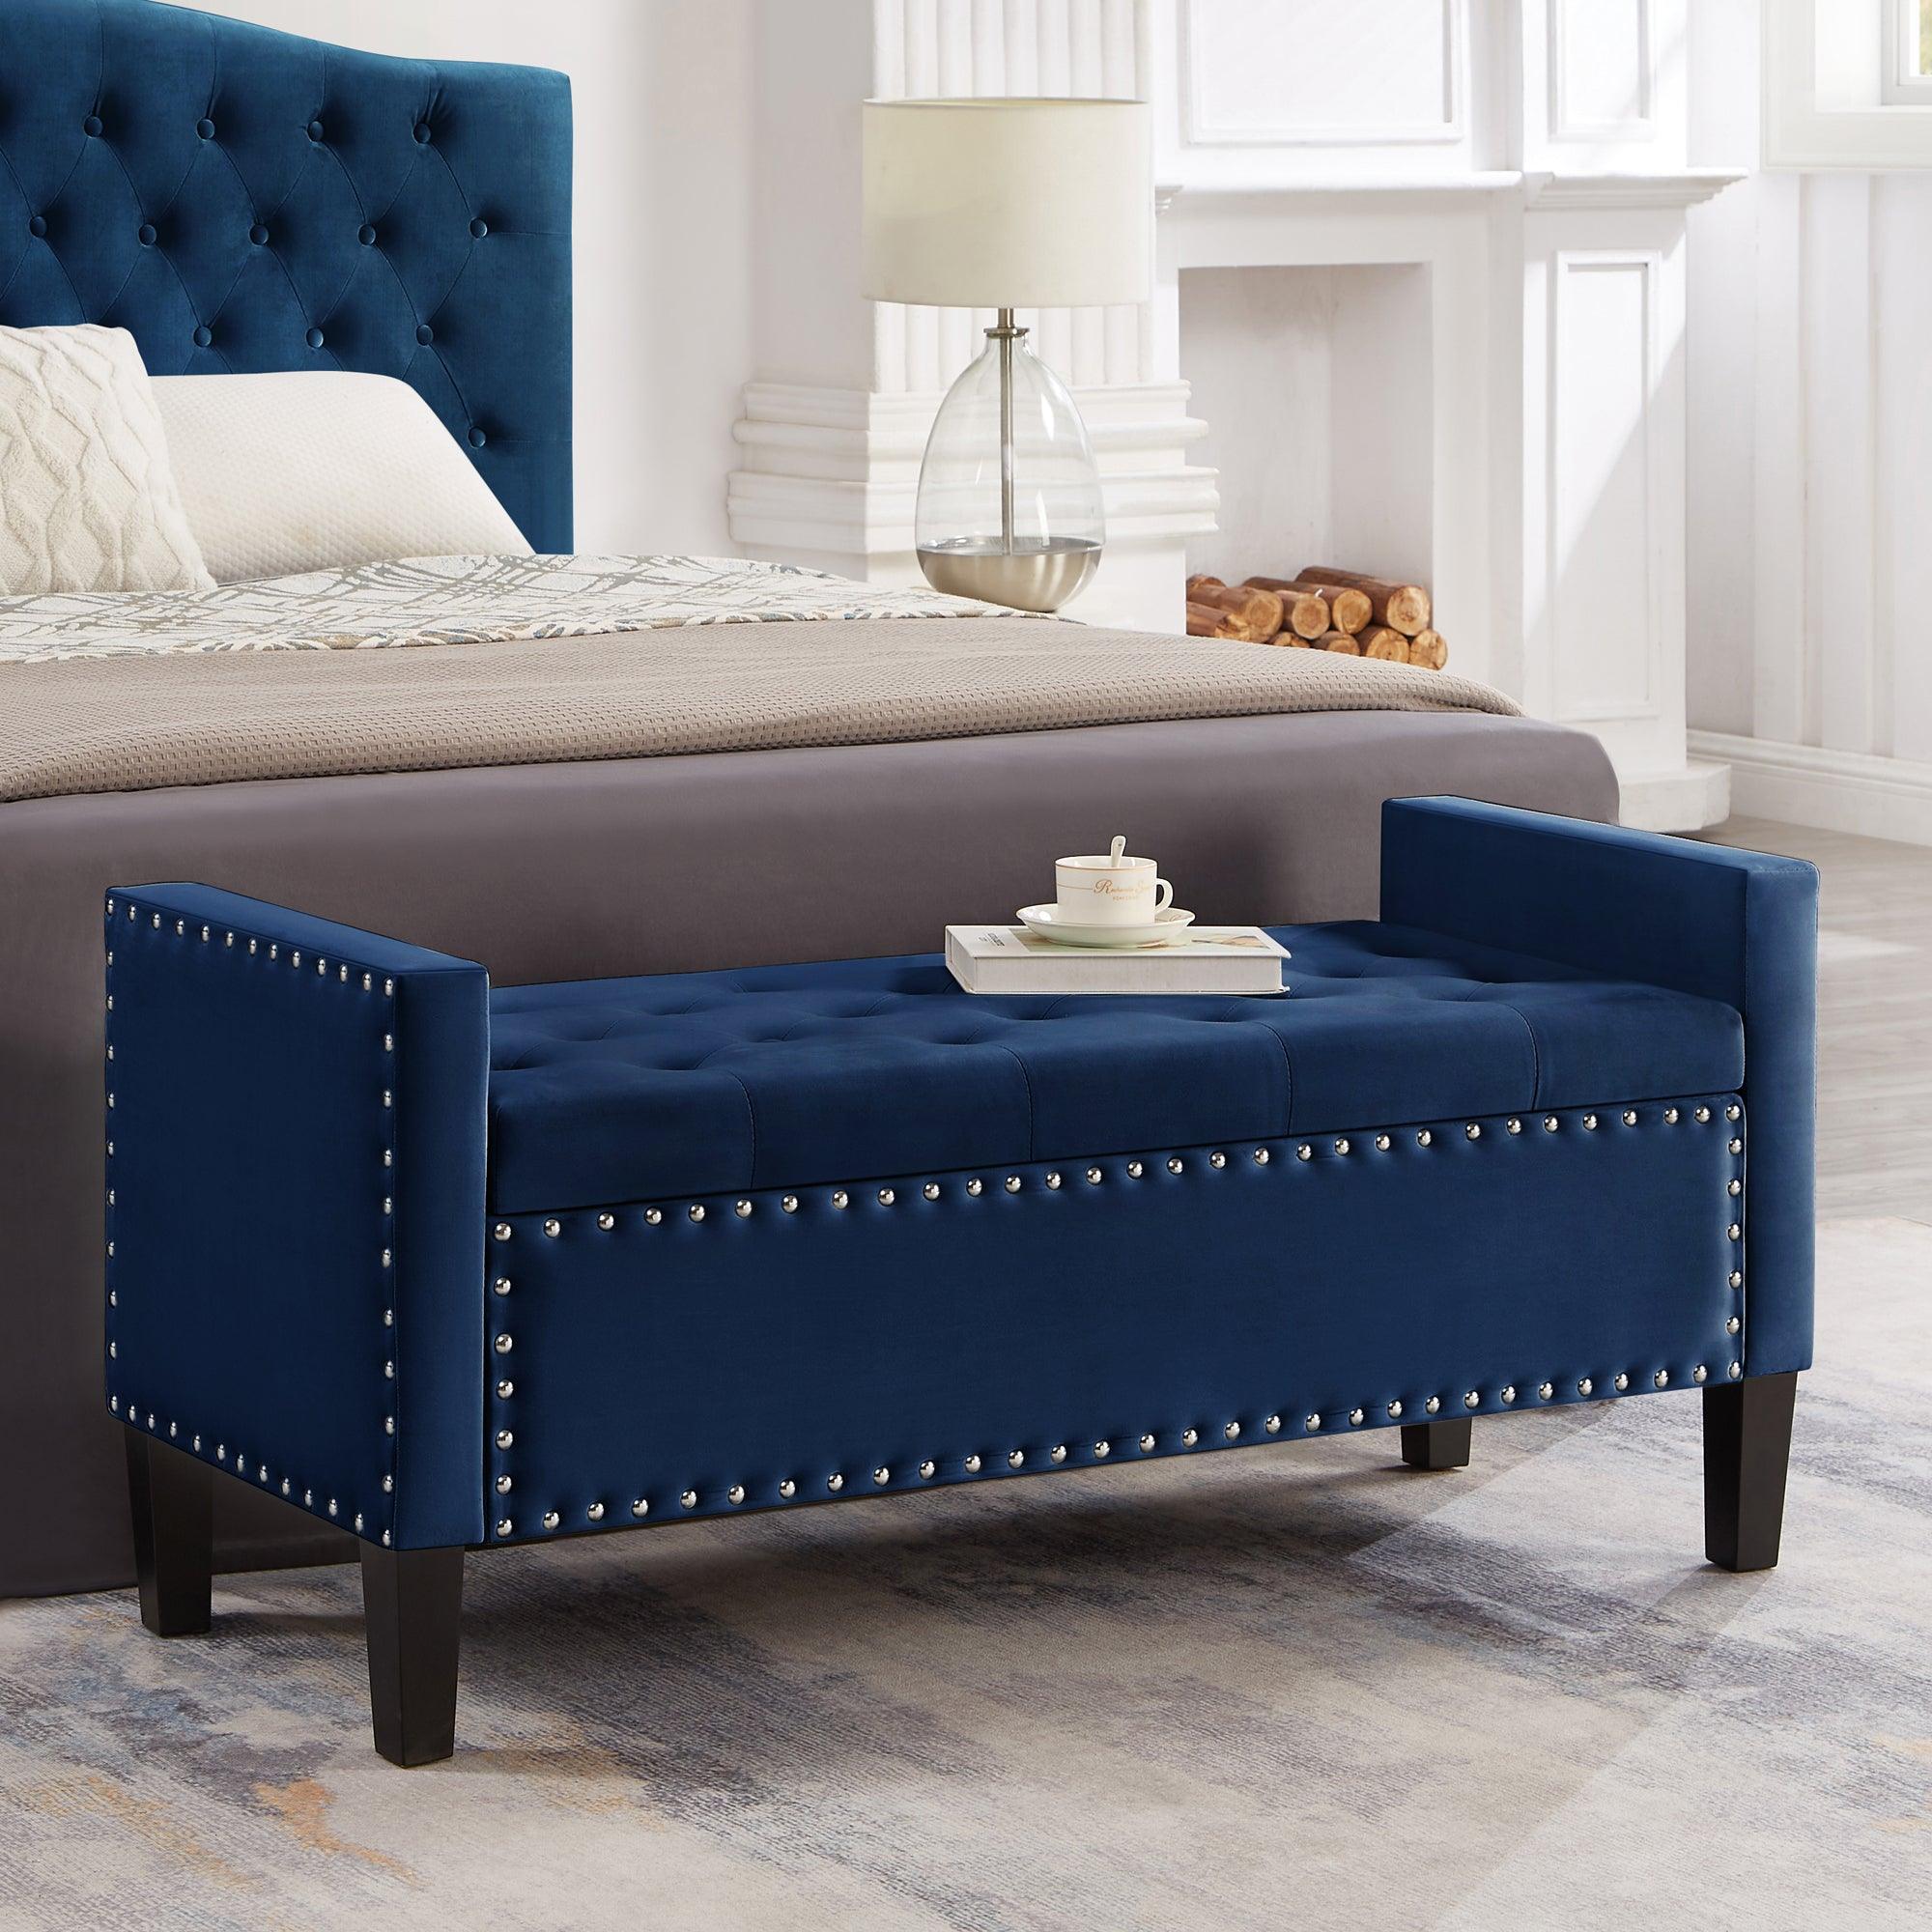 🆓🚛 Upholstered Tufted Button Storage Bench With Nails Trim, Entryway Living Room Soft Padded Seat With Armrest, Bed Bench, Navy